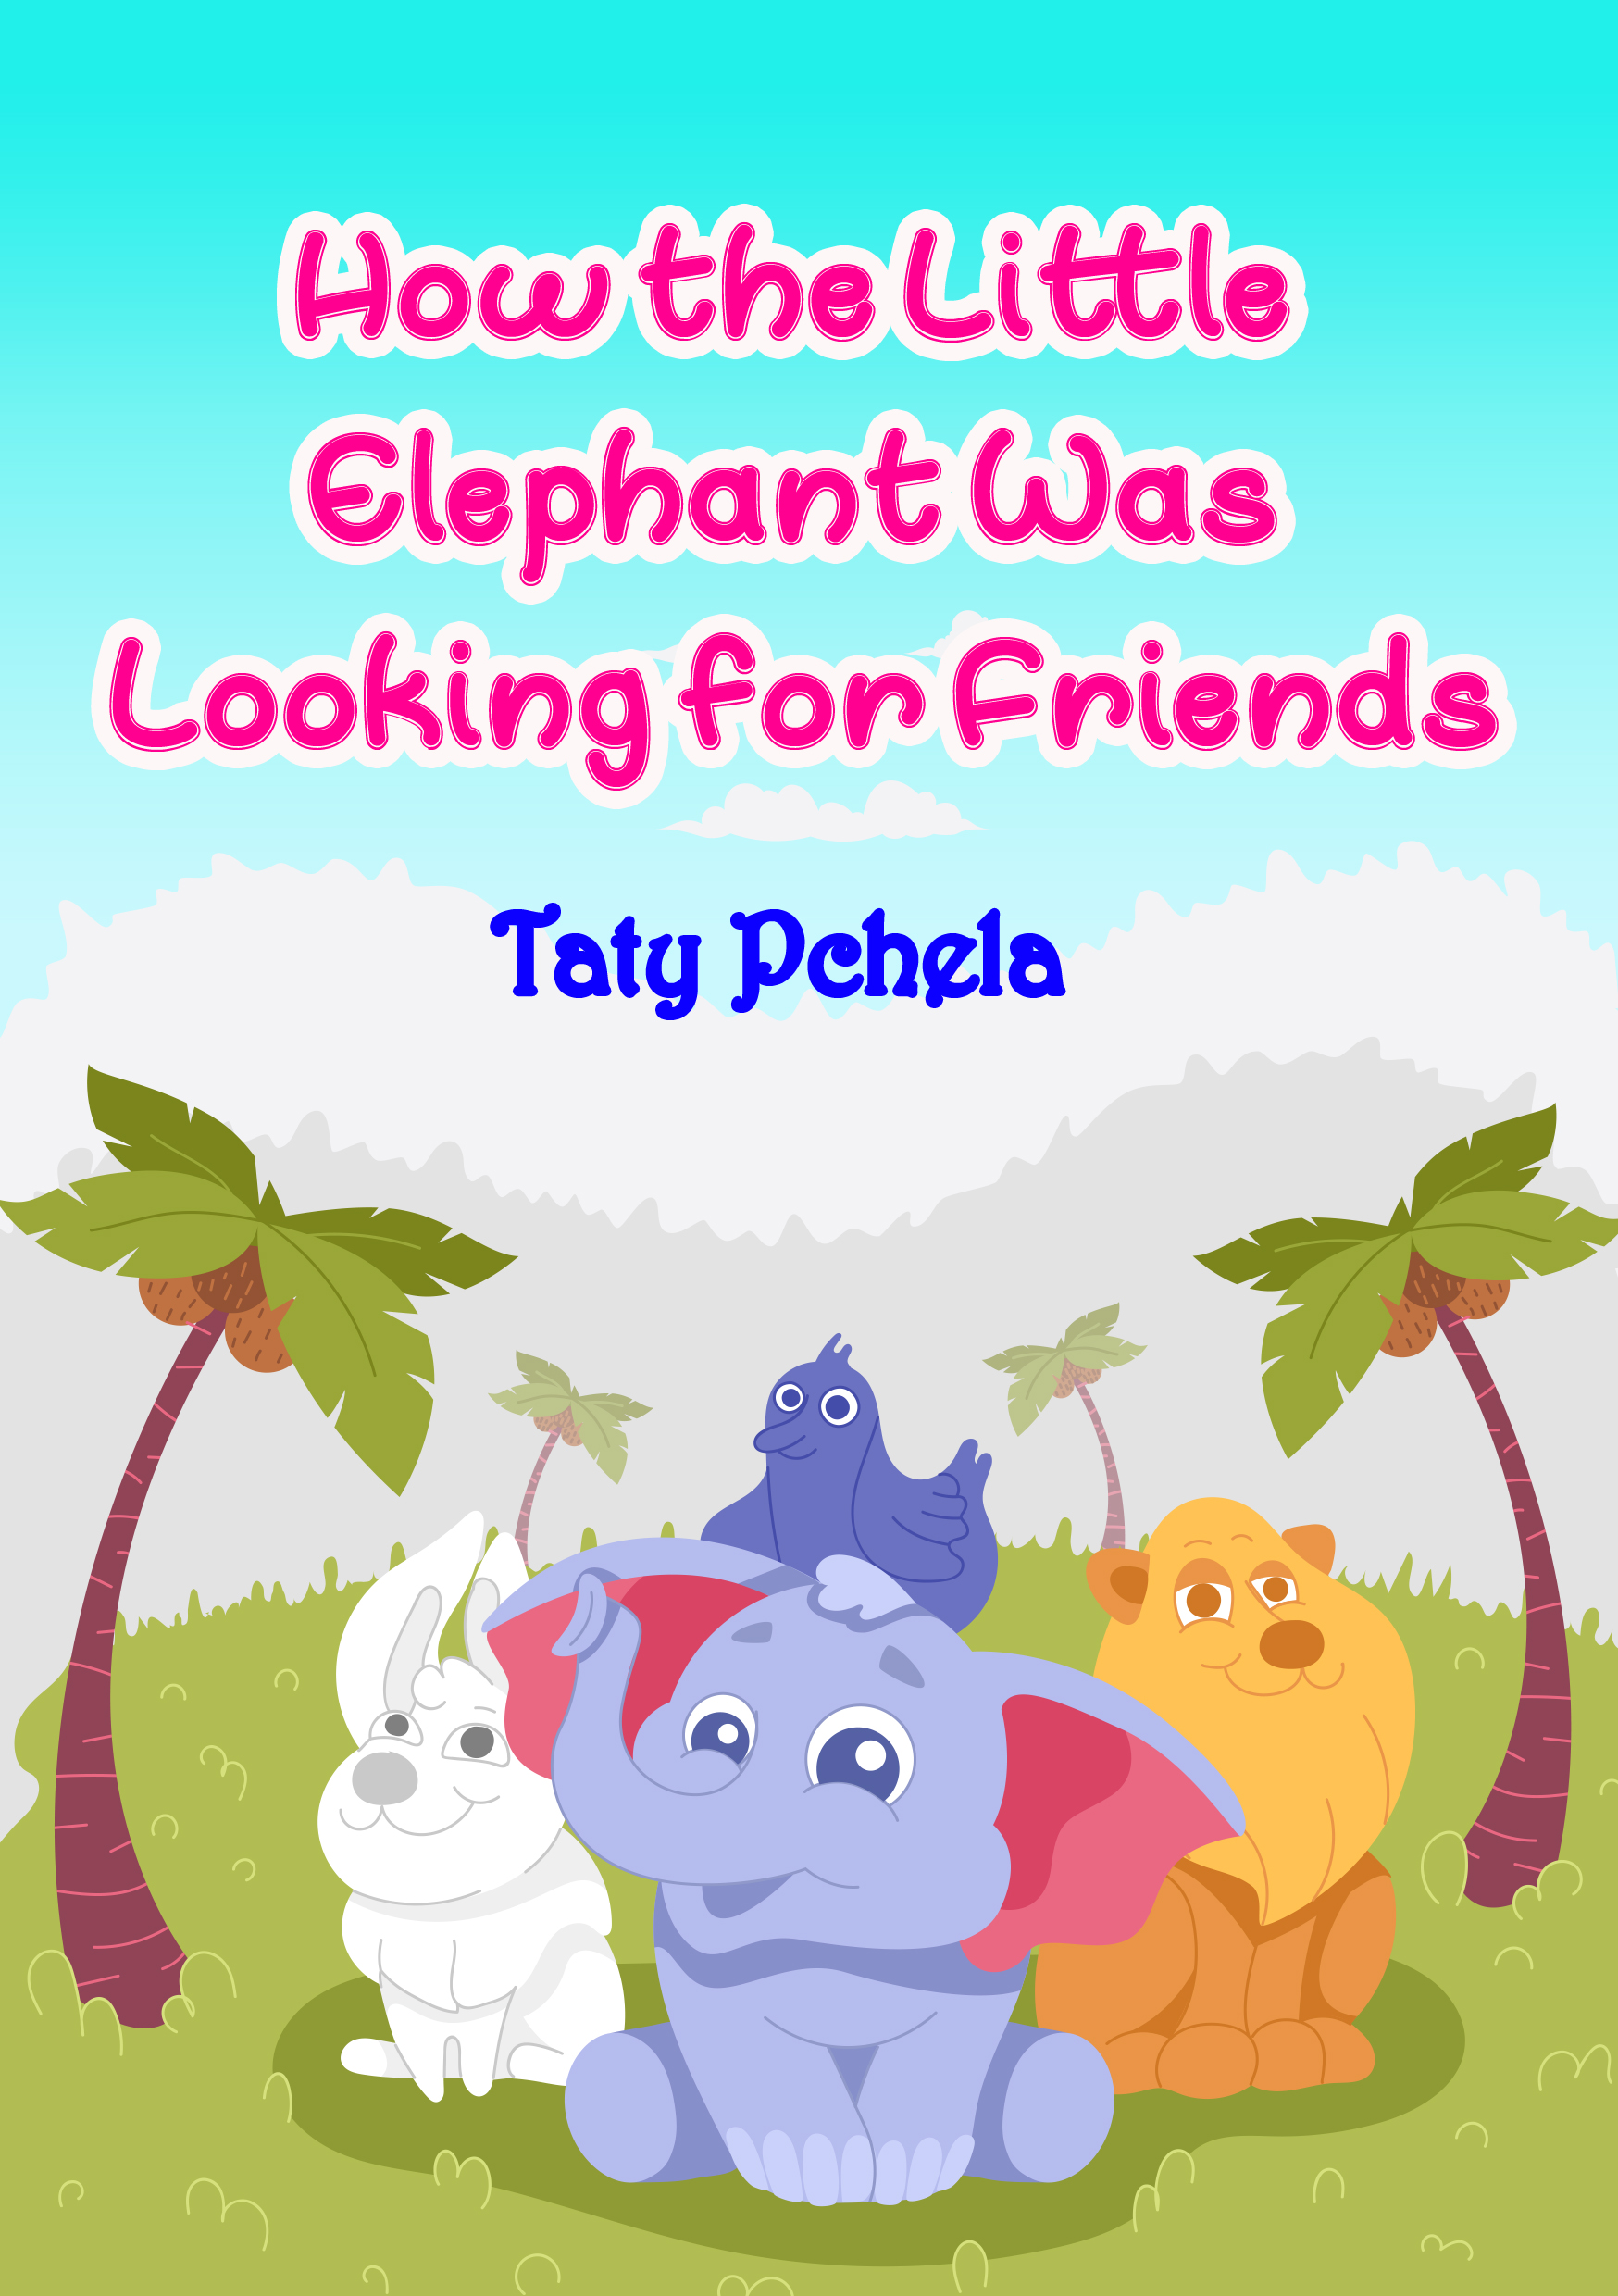 FREE: How the Little Elephant Was Looking for Friends: About Kindness, Friendship and Mutual Assistance by Taty Pchela